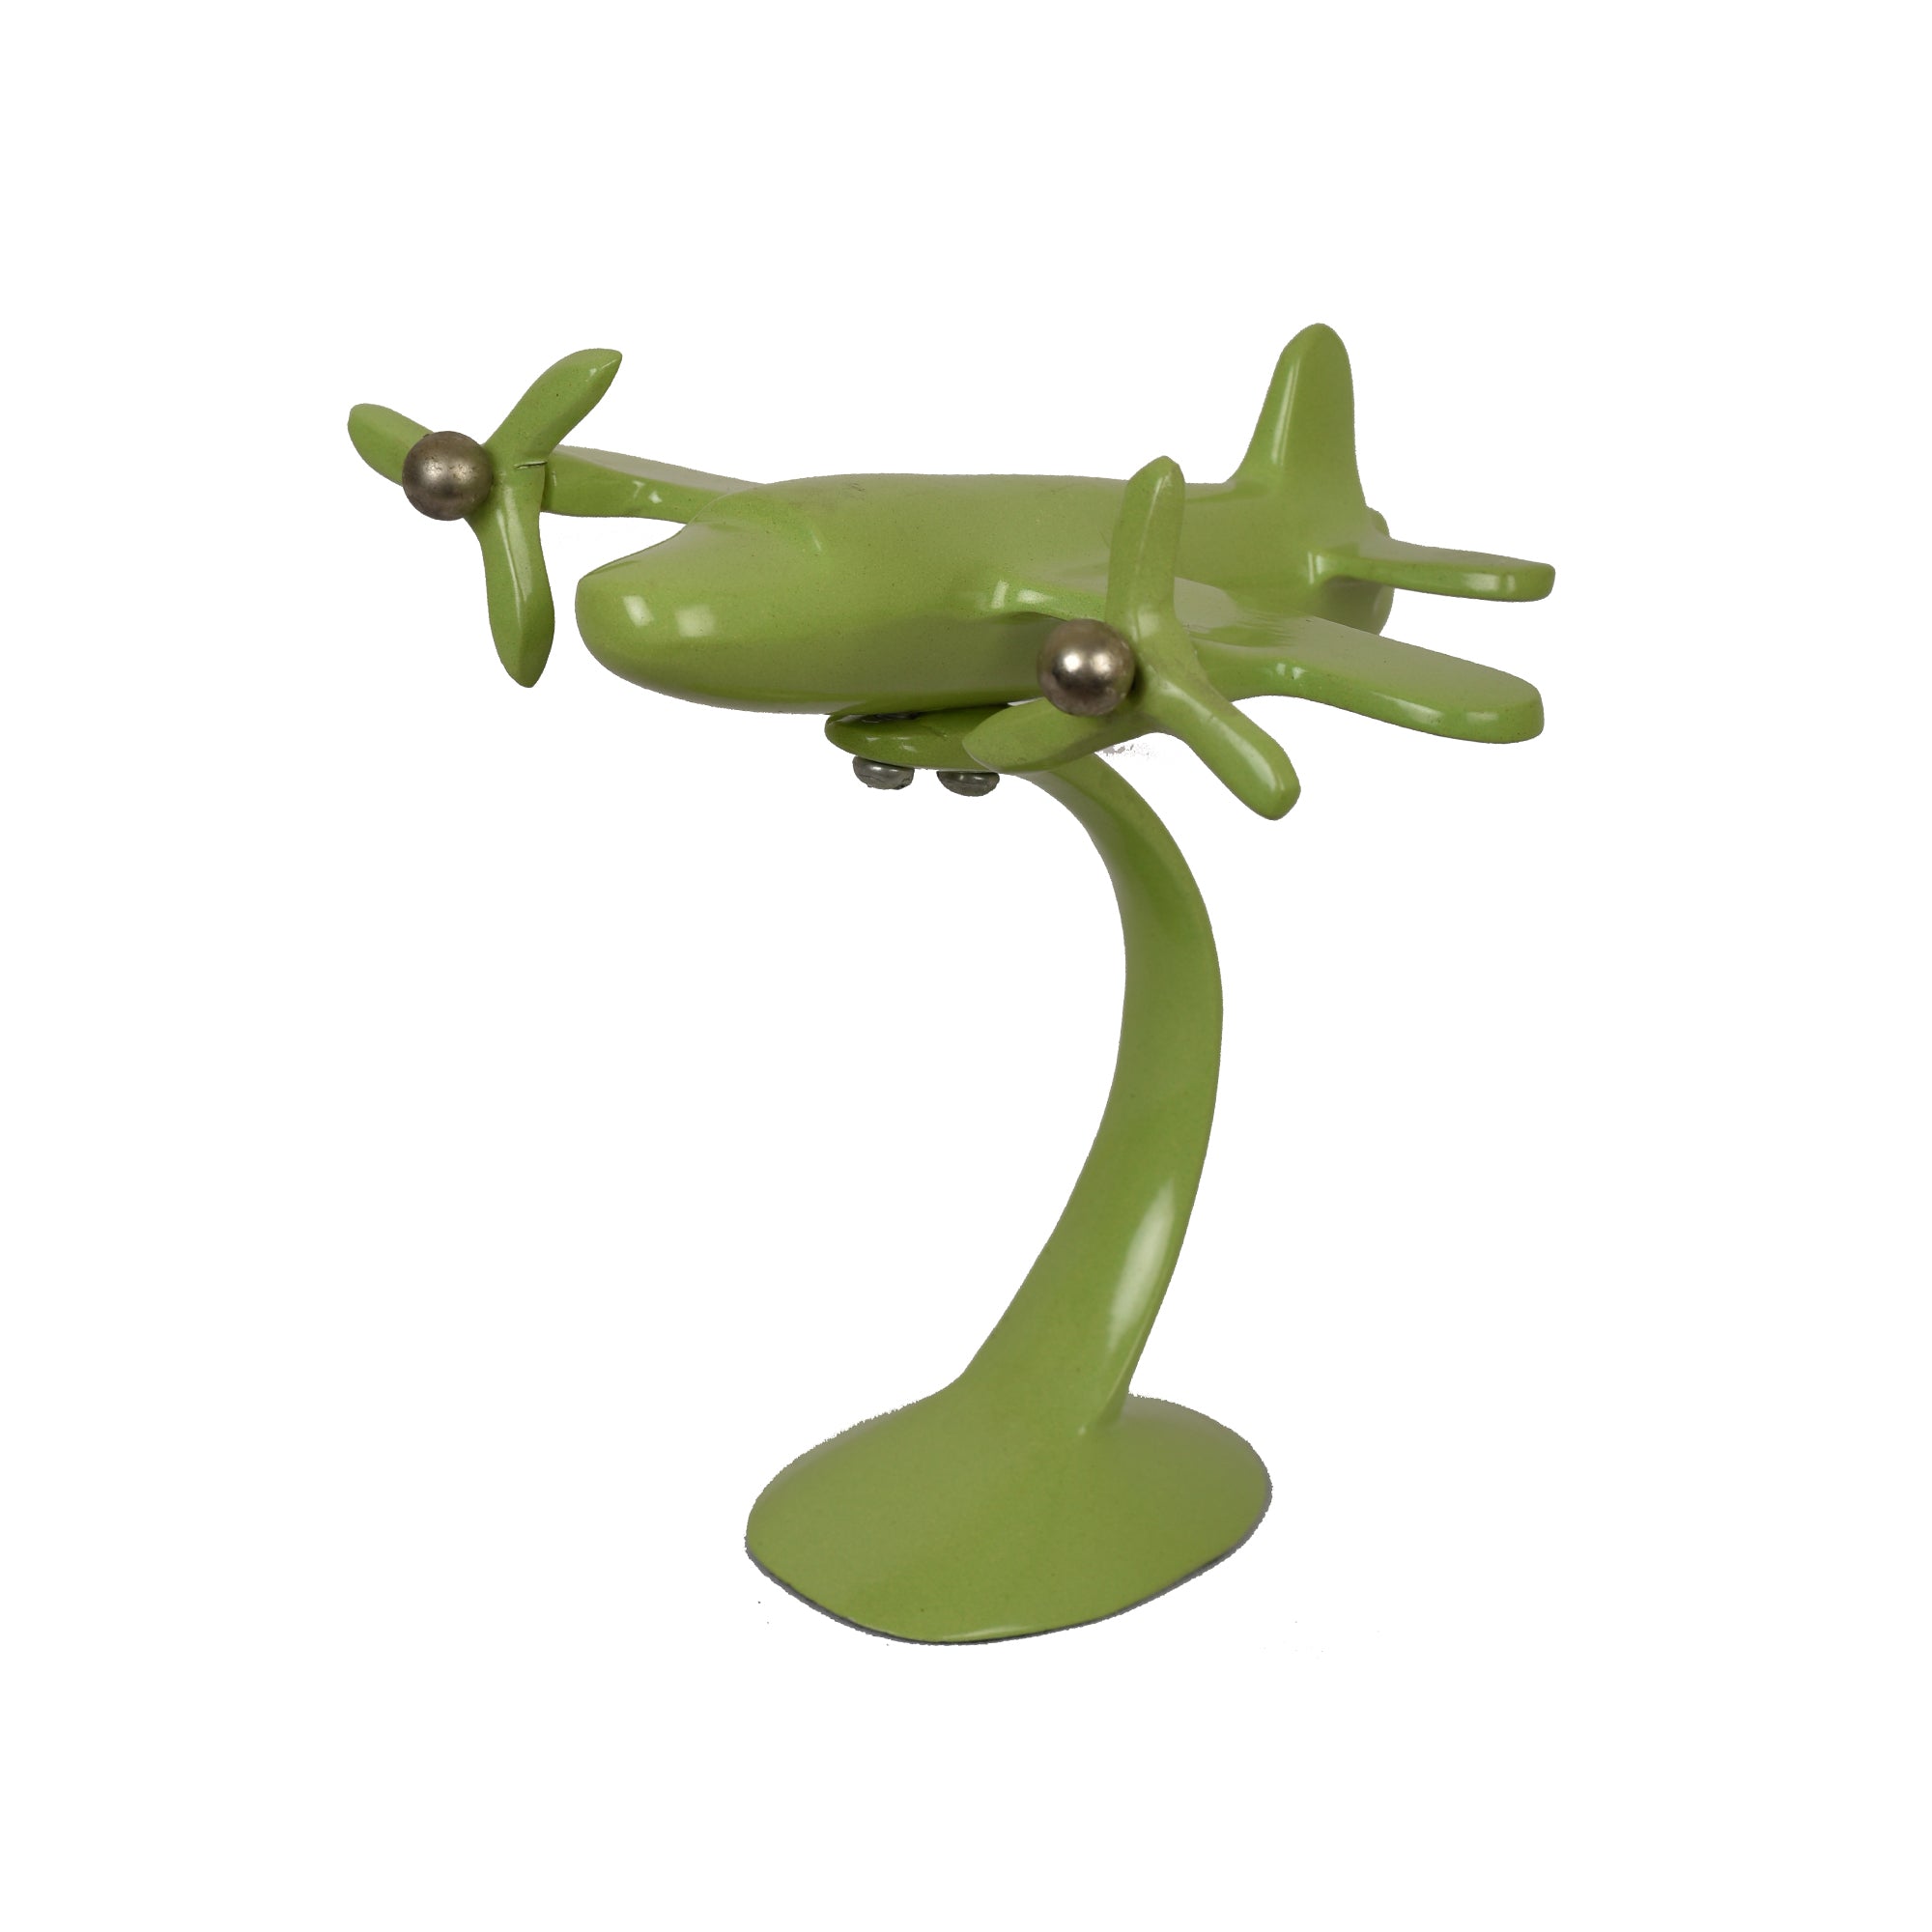 Aeroplane Sculpture 7 inches tall Green